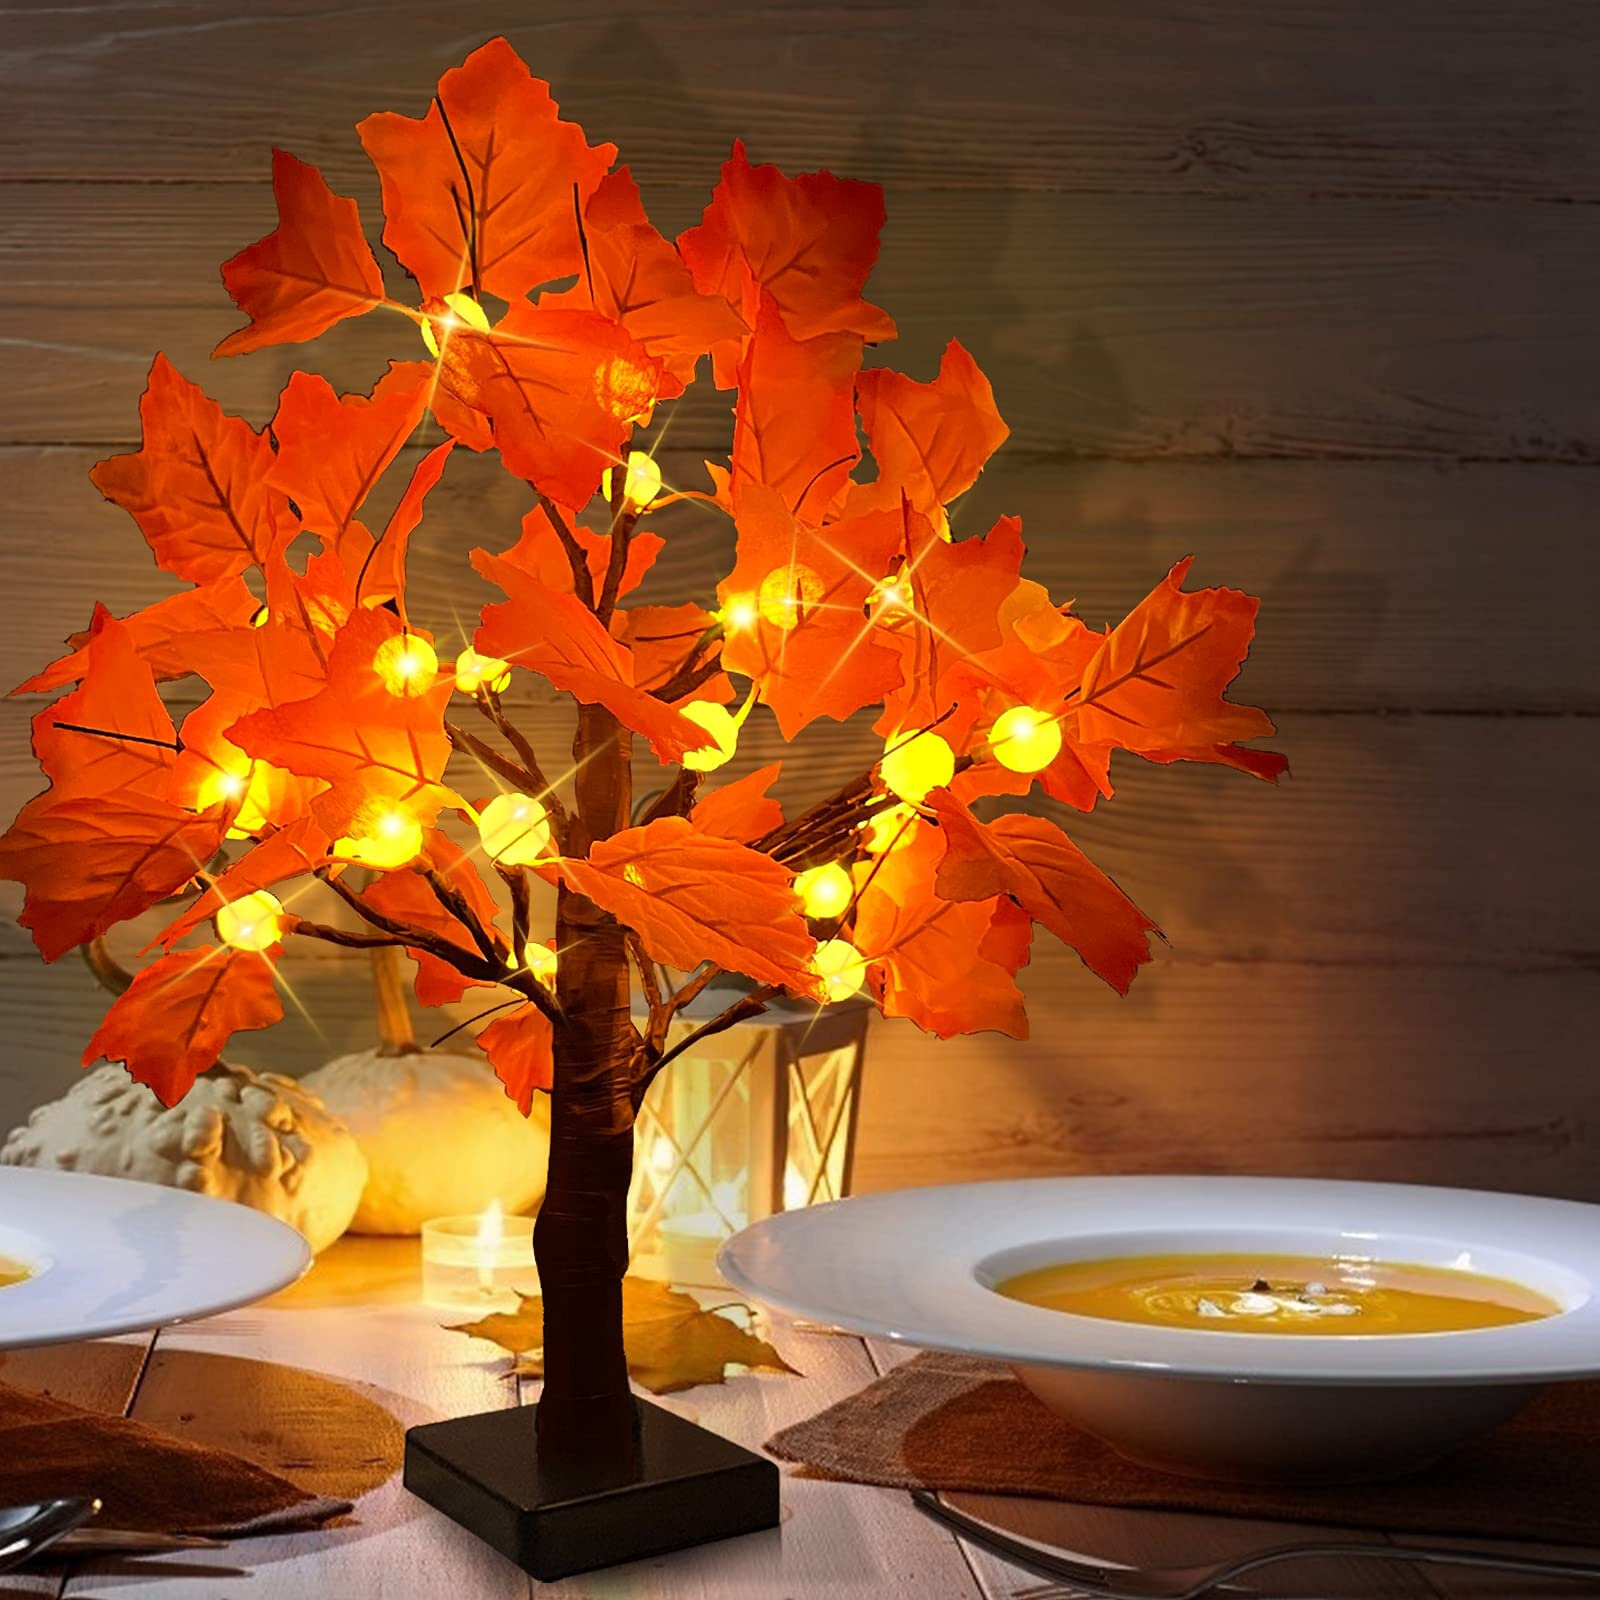 24 LED Lighted Tabletop Fall Maple Tree With Warm White Xmas Decor Lights NEW 